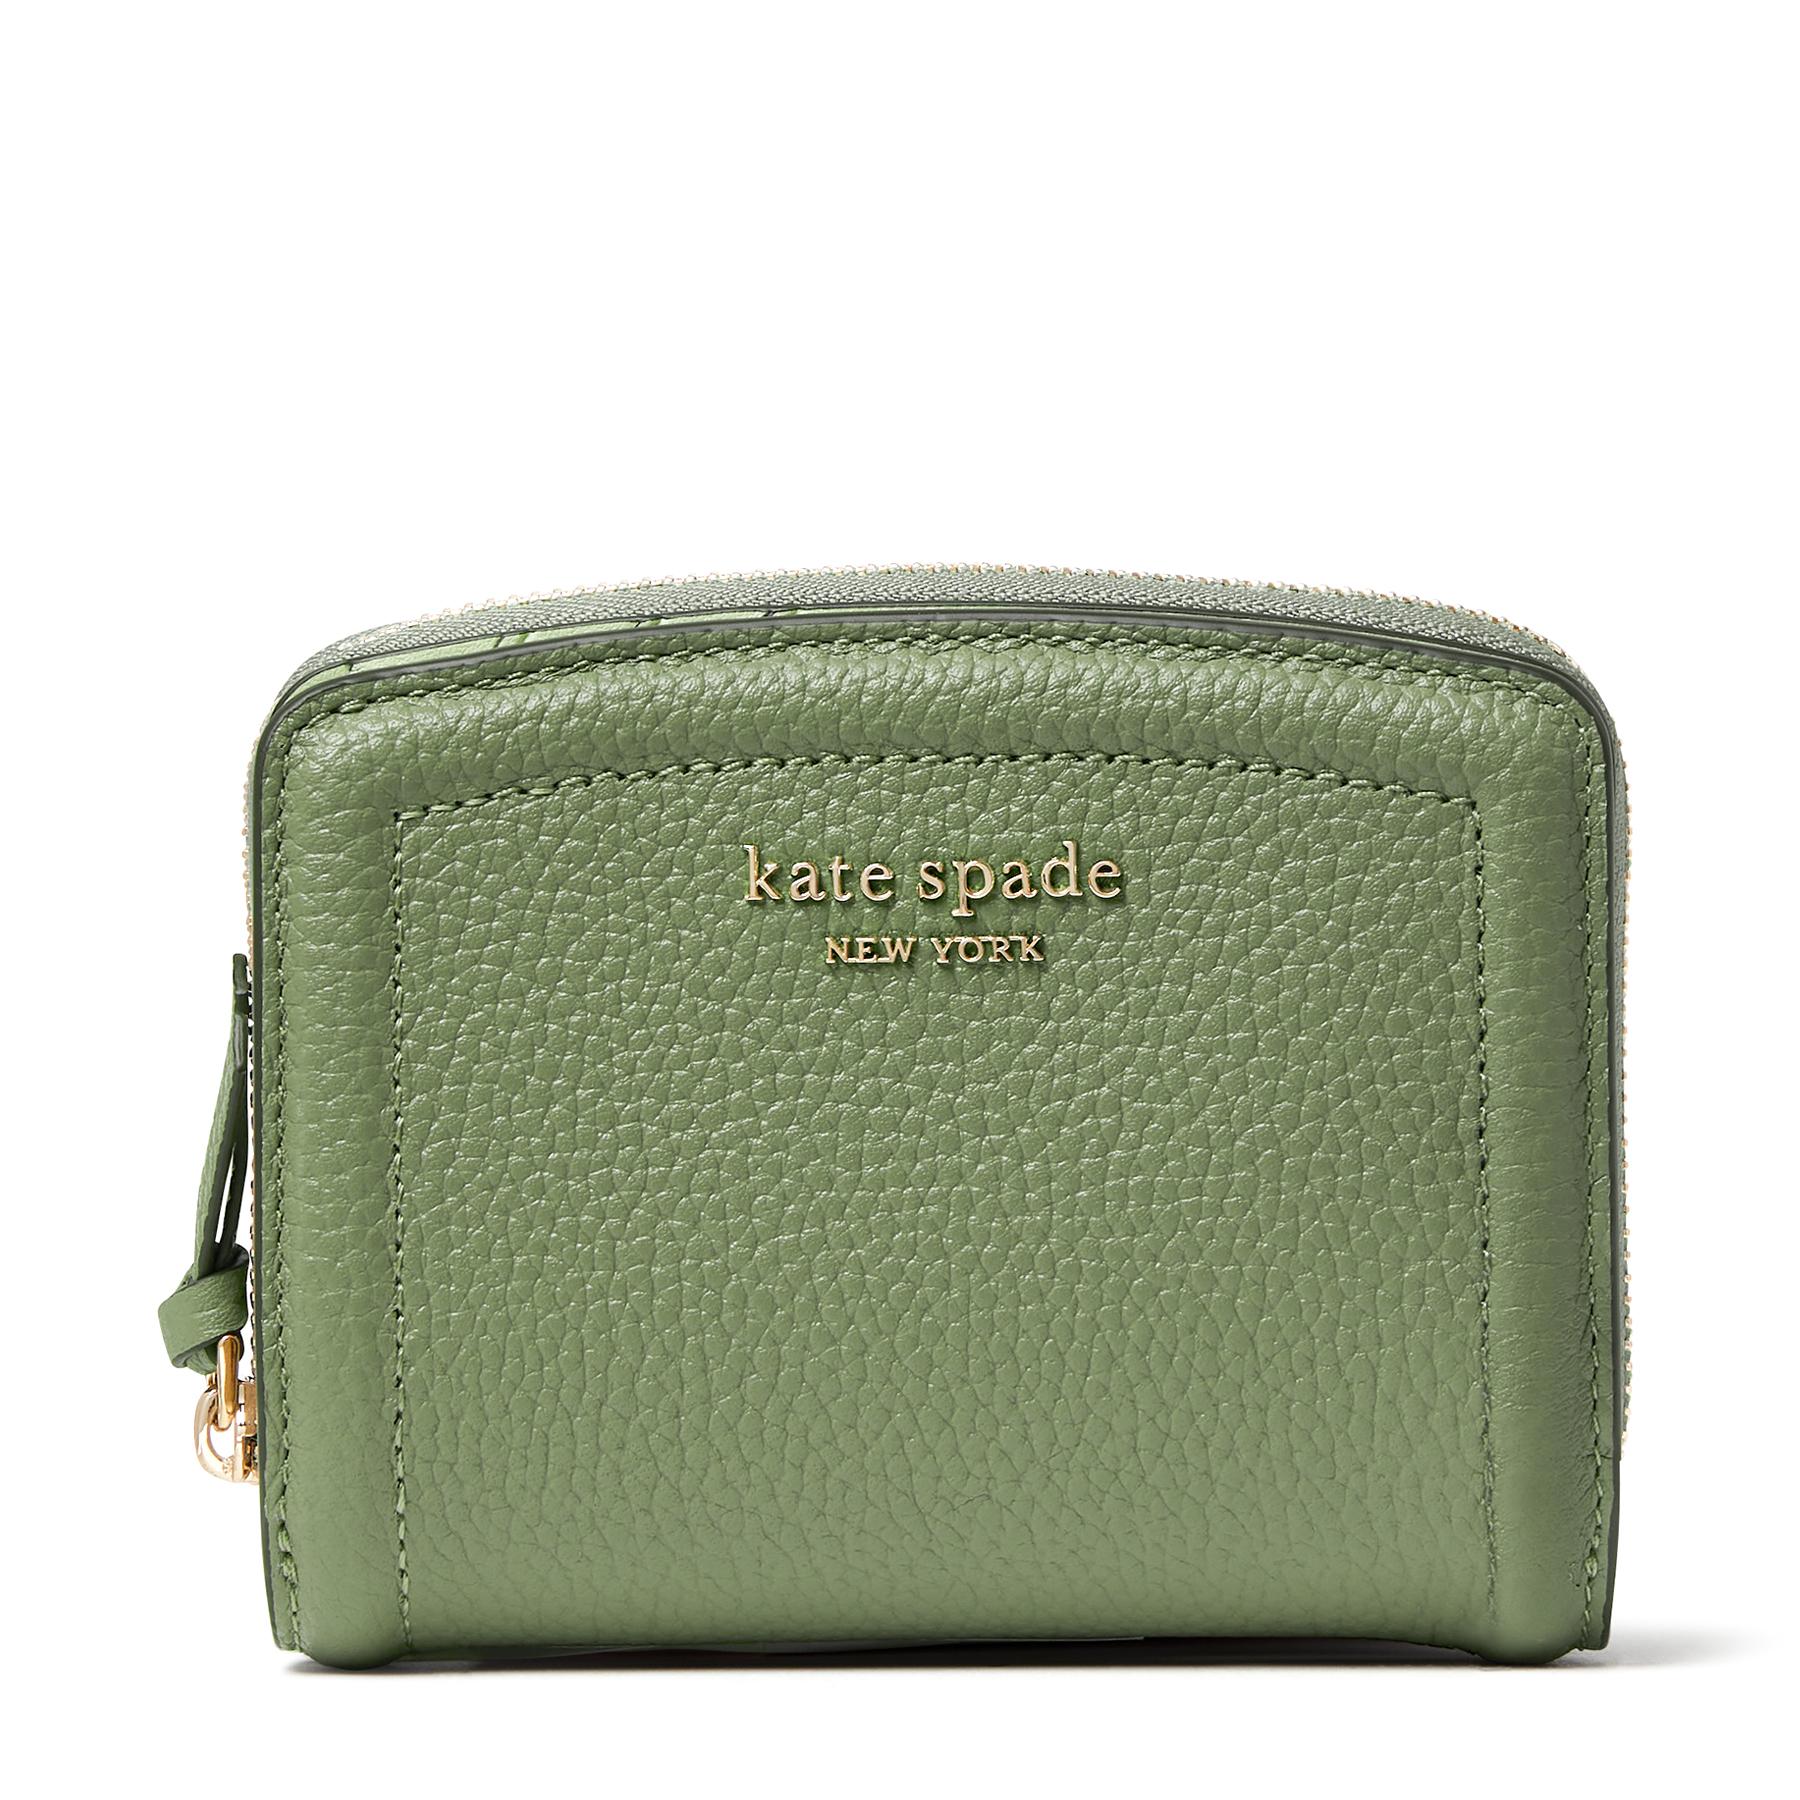 Kate Spade Knott Pebbled Leather Small Compact Wallet in Green | Lyst